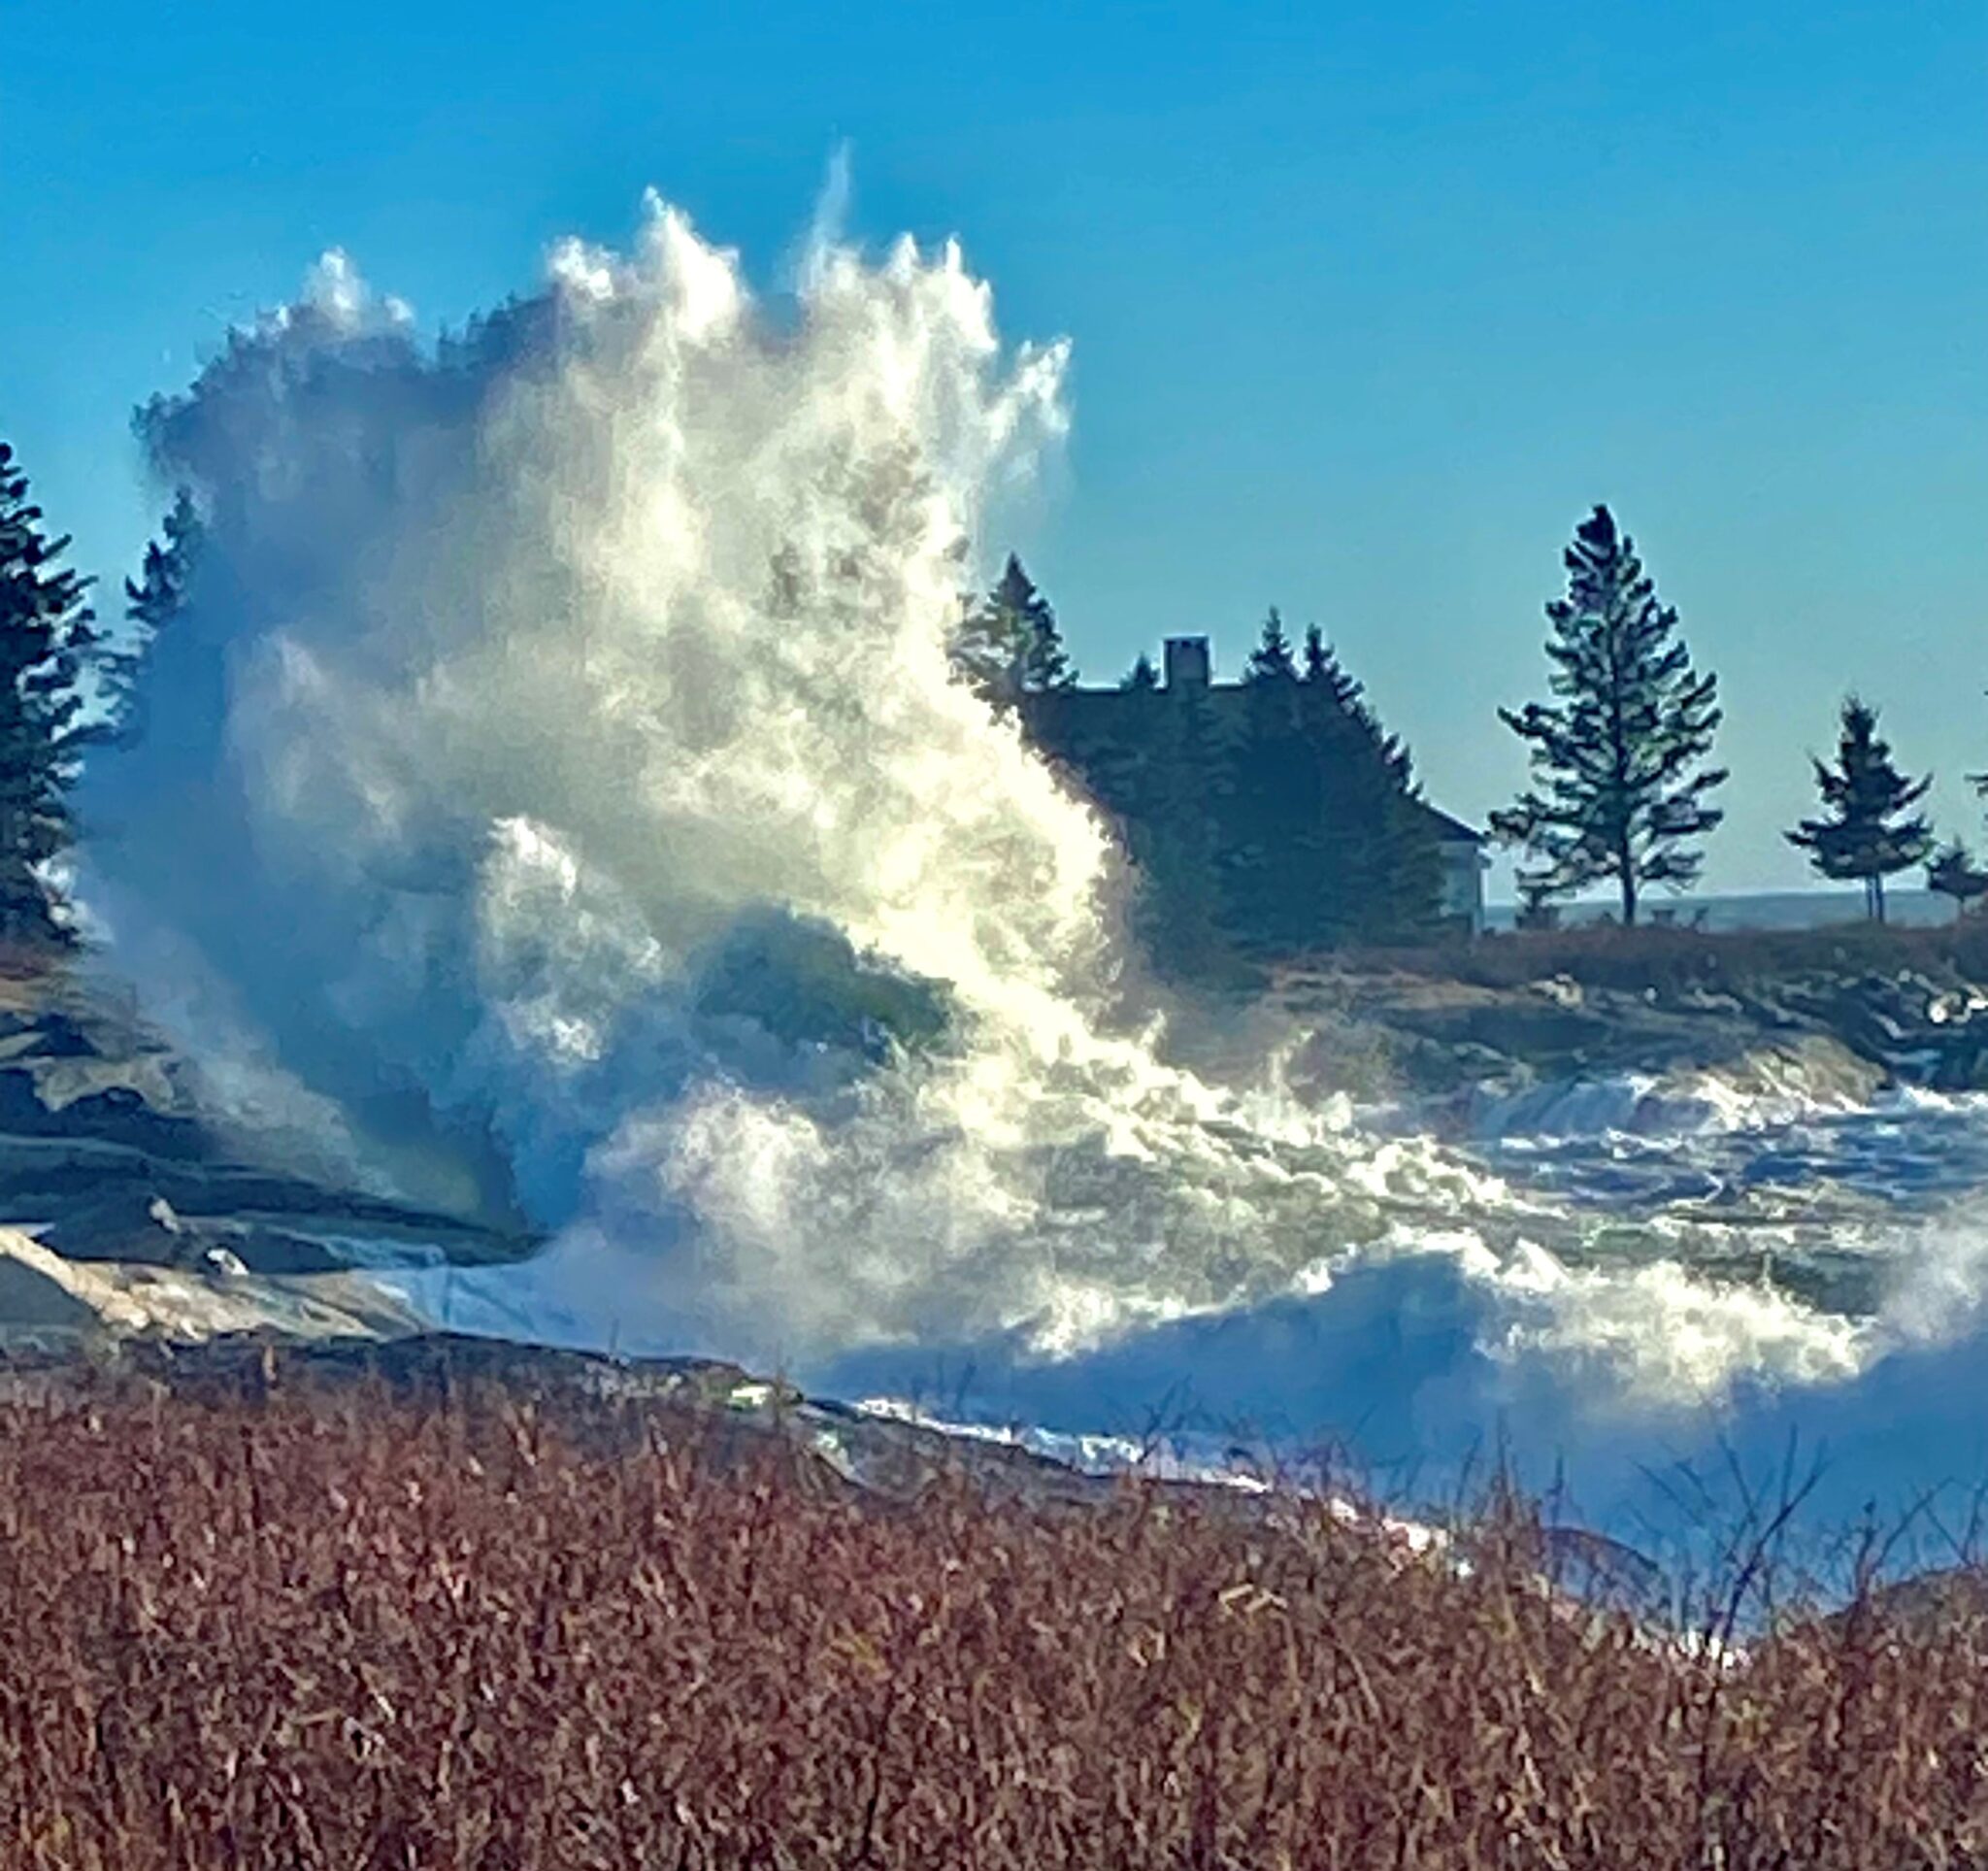 Amazing wave with spray reaching unbelievable heights.